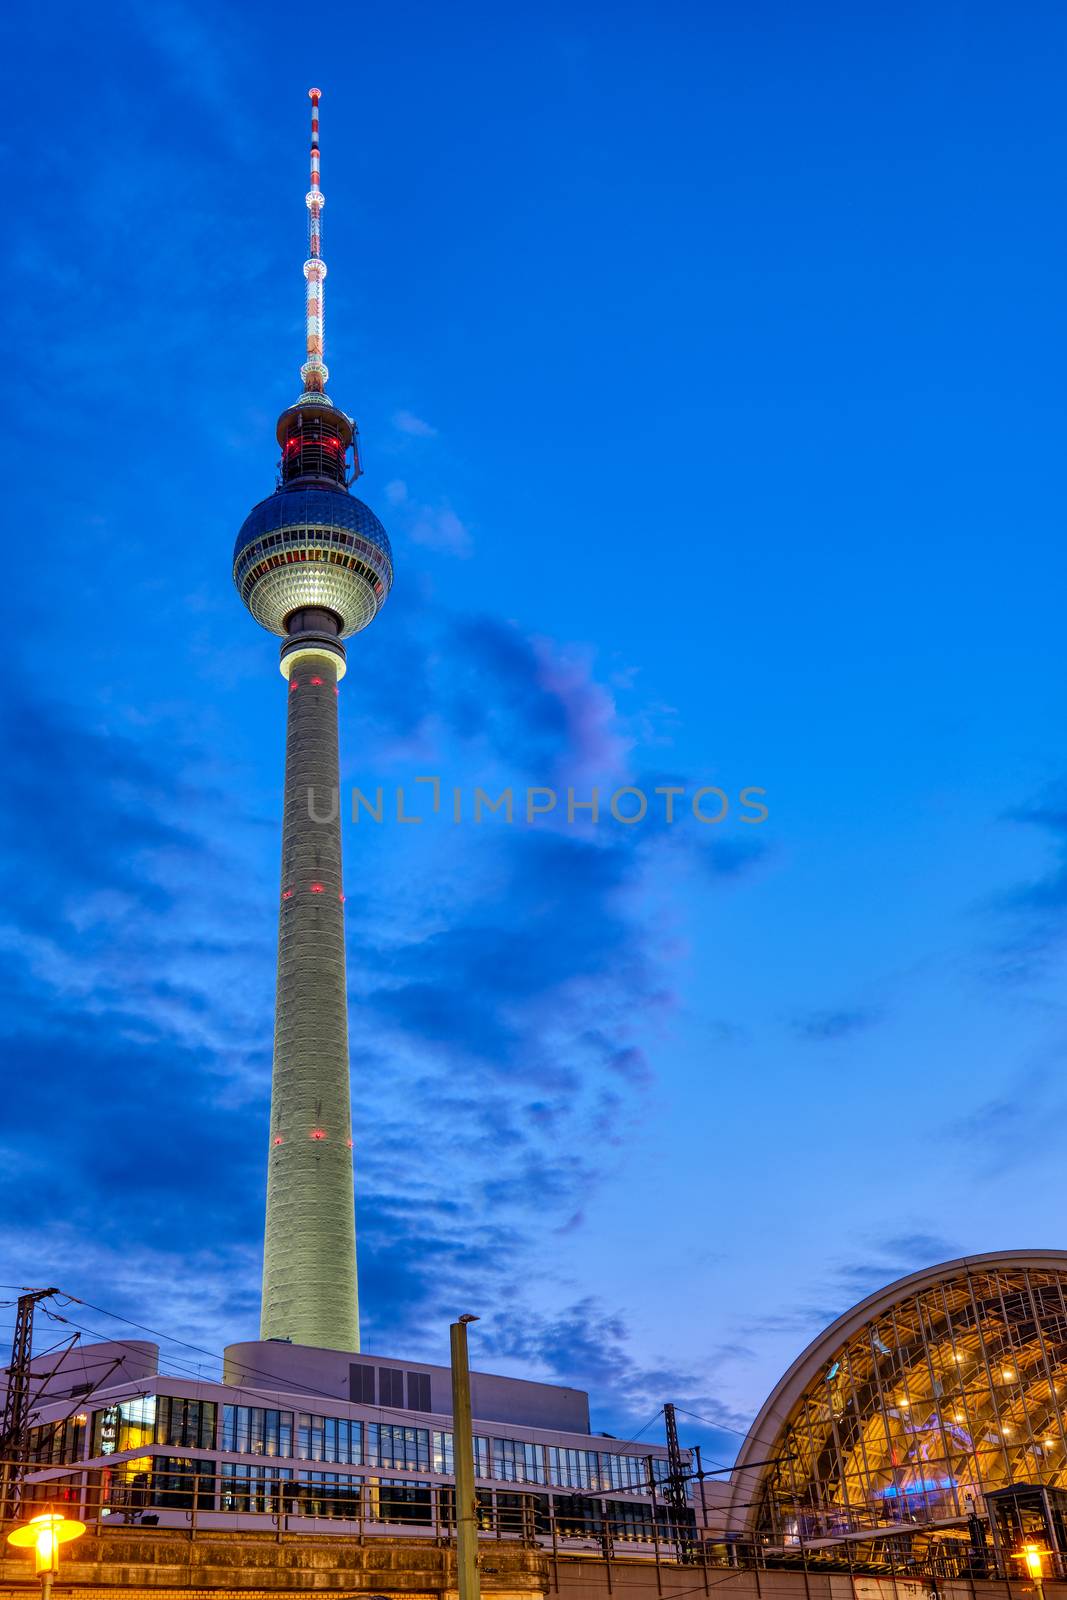 The famous Berlin Television Tower and the trainstation at Alexanderplatz at night